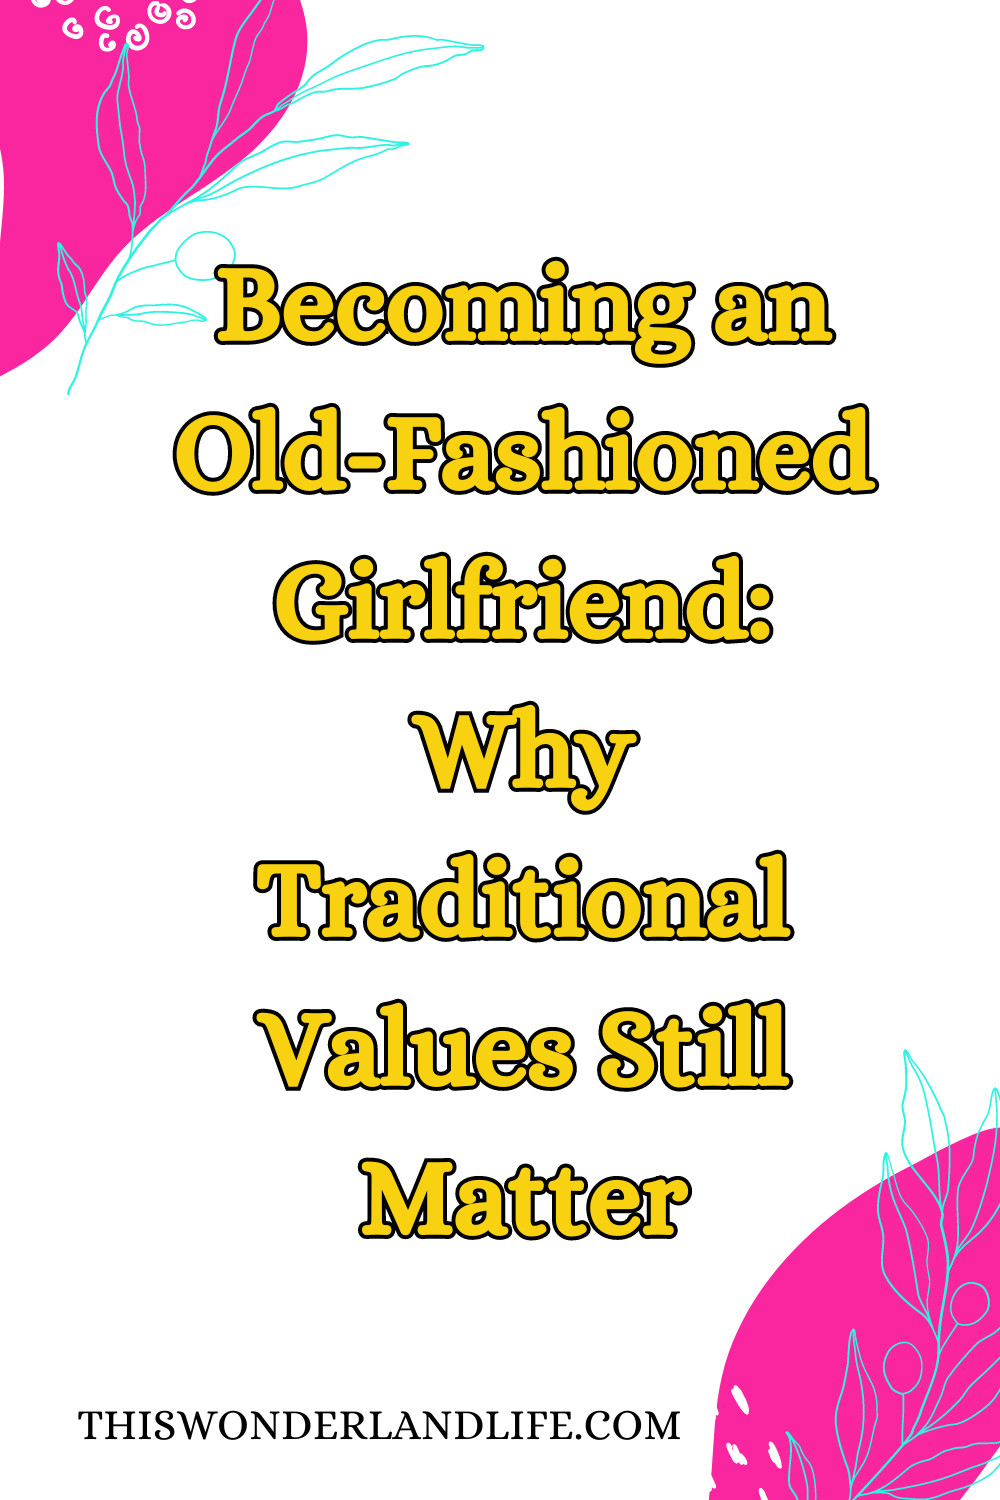 Becoming an Old-Fashioned Girlfriend: Why Traditional Values Still Matter